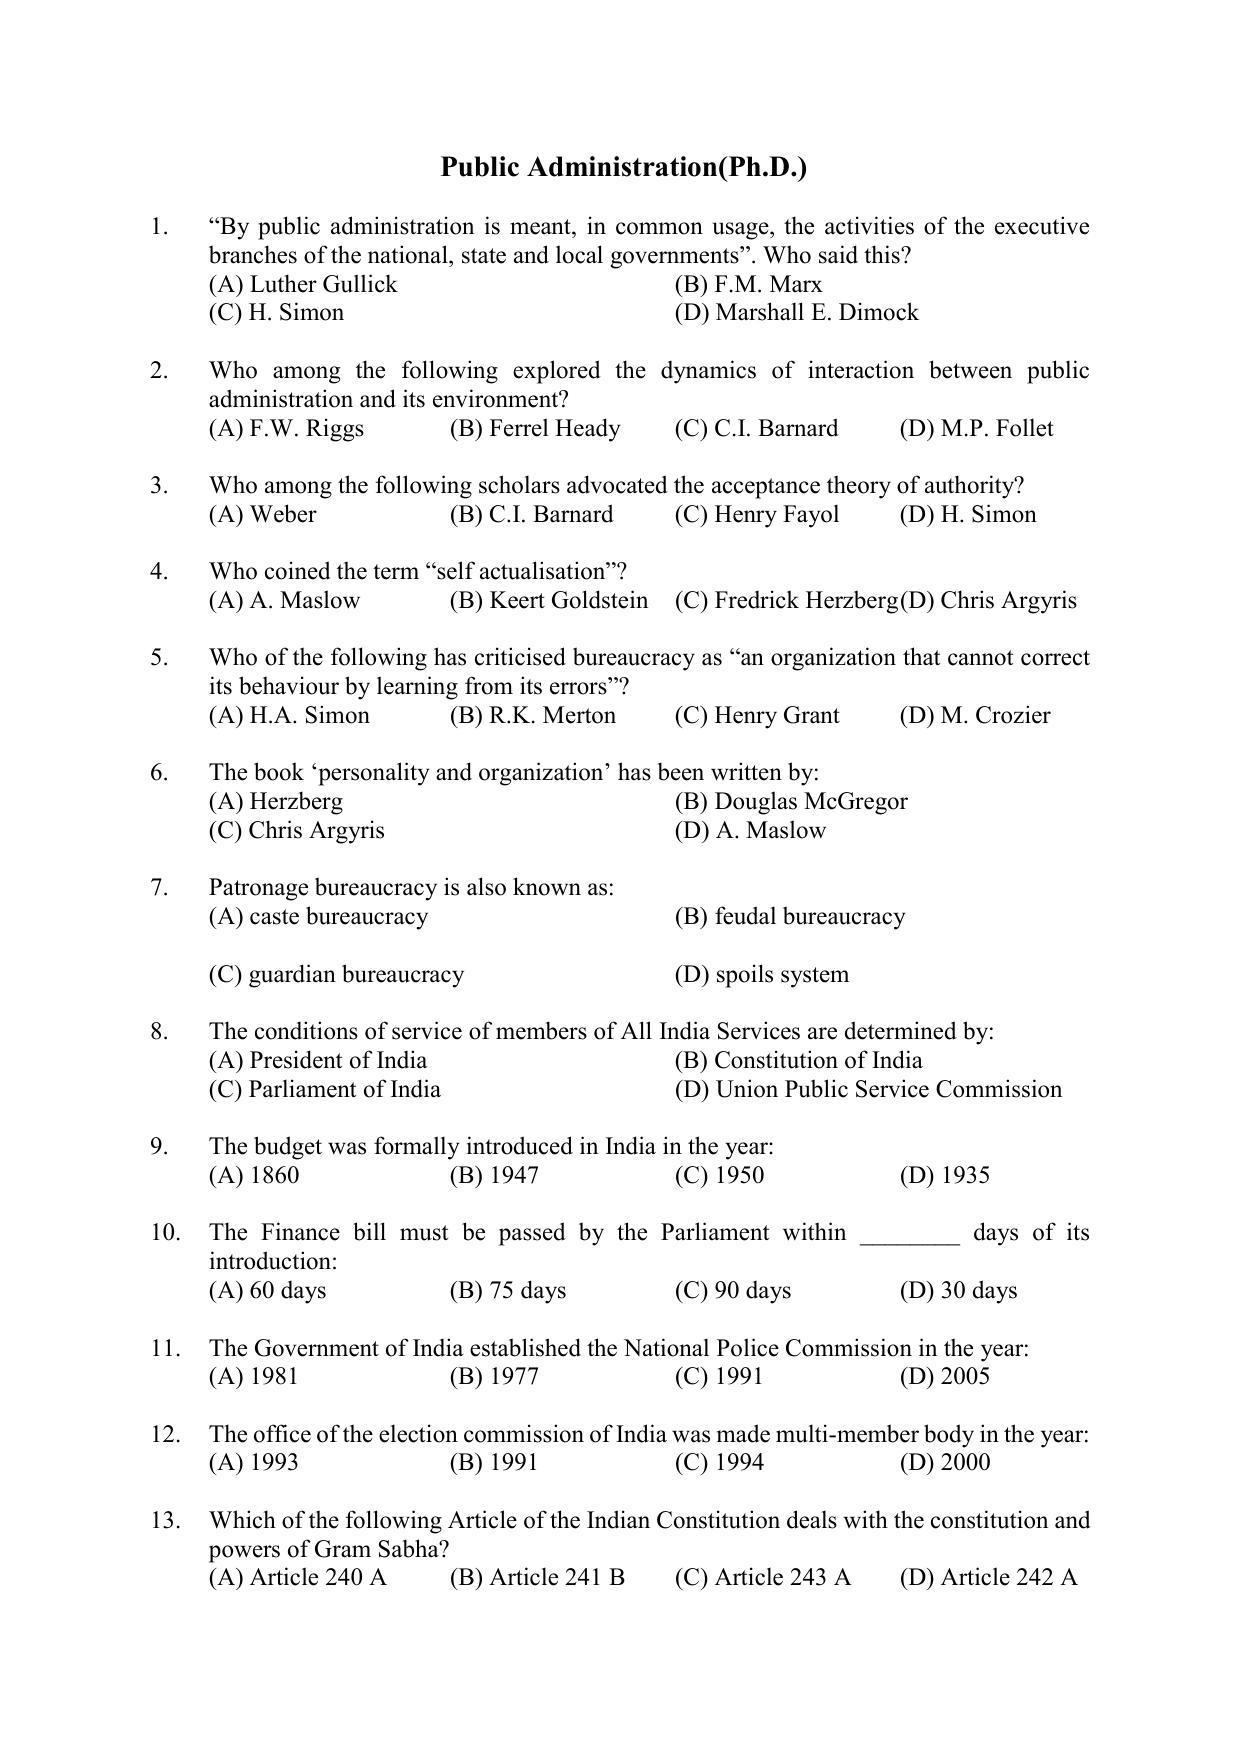 PU MPET Ancient Indian History & Archeology 2022 Question Papers - Page 39